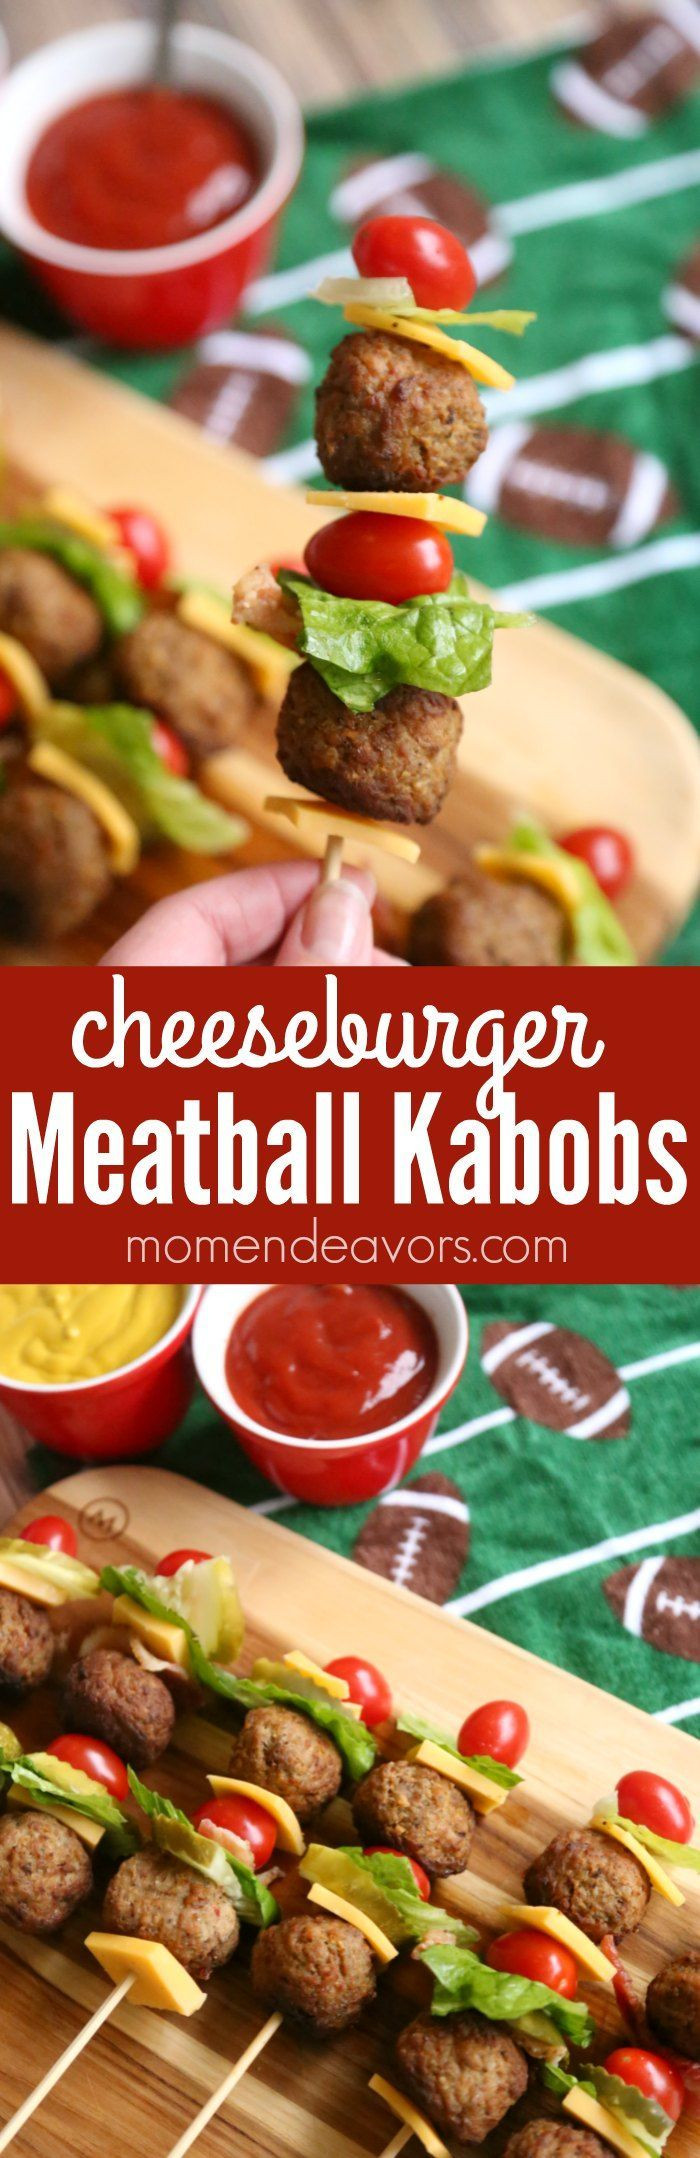 Football Dinners Recipes
 Cheeseburger Meatball Kabobs a fun party appetizer easy